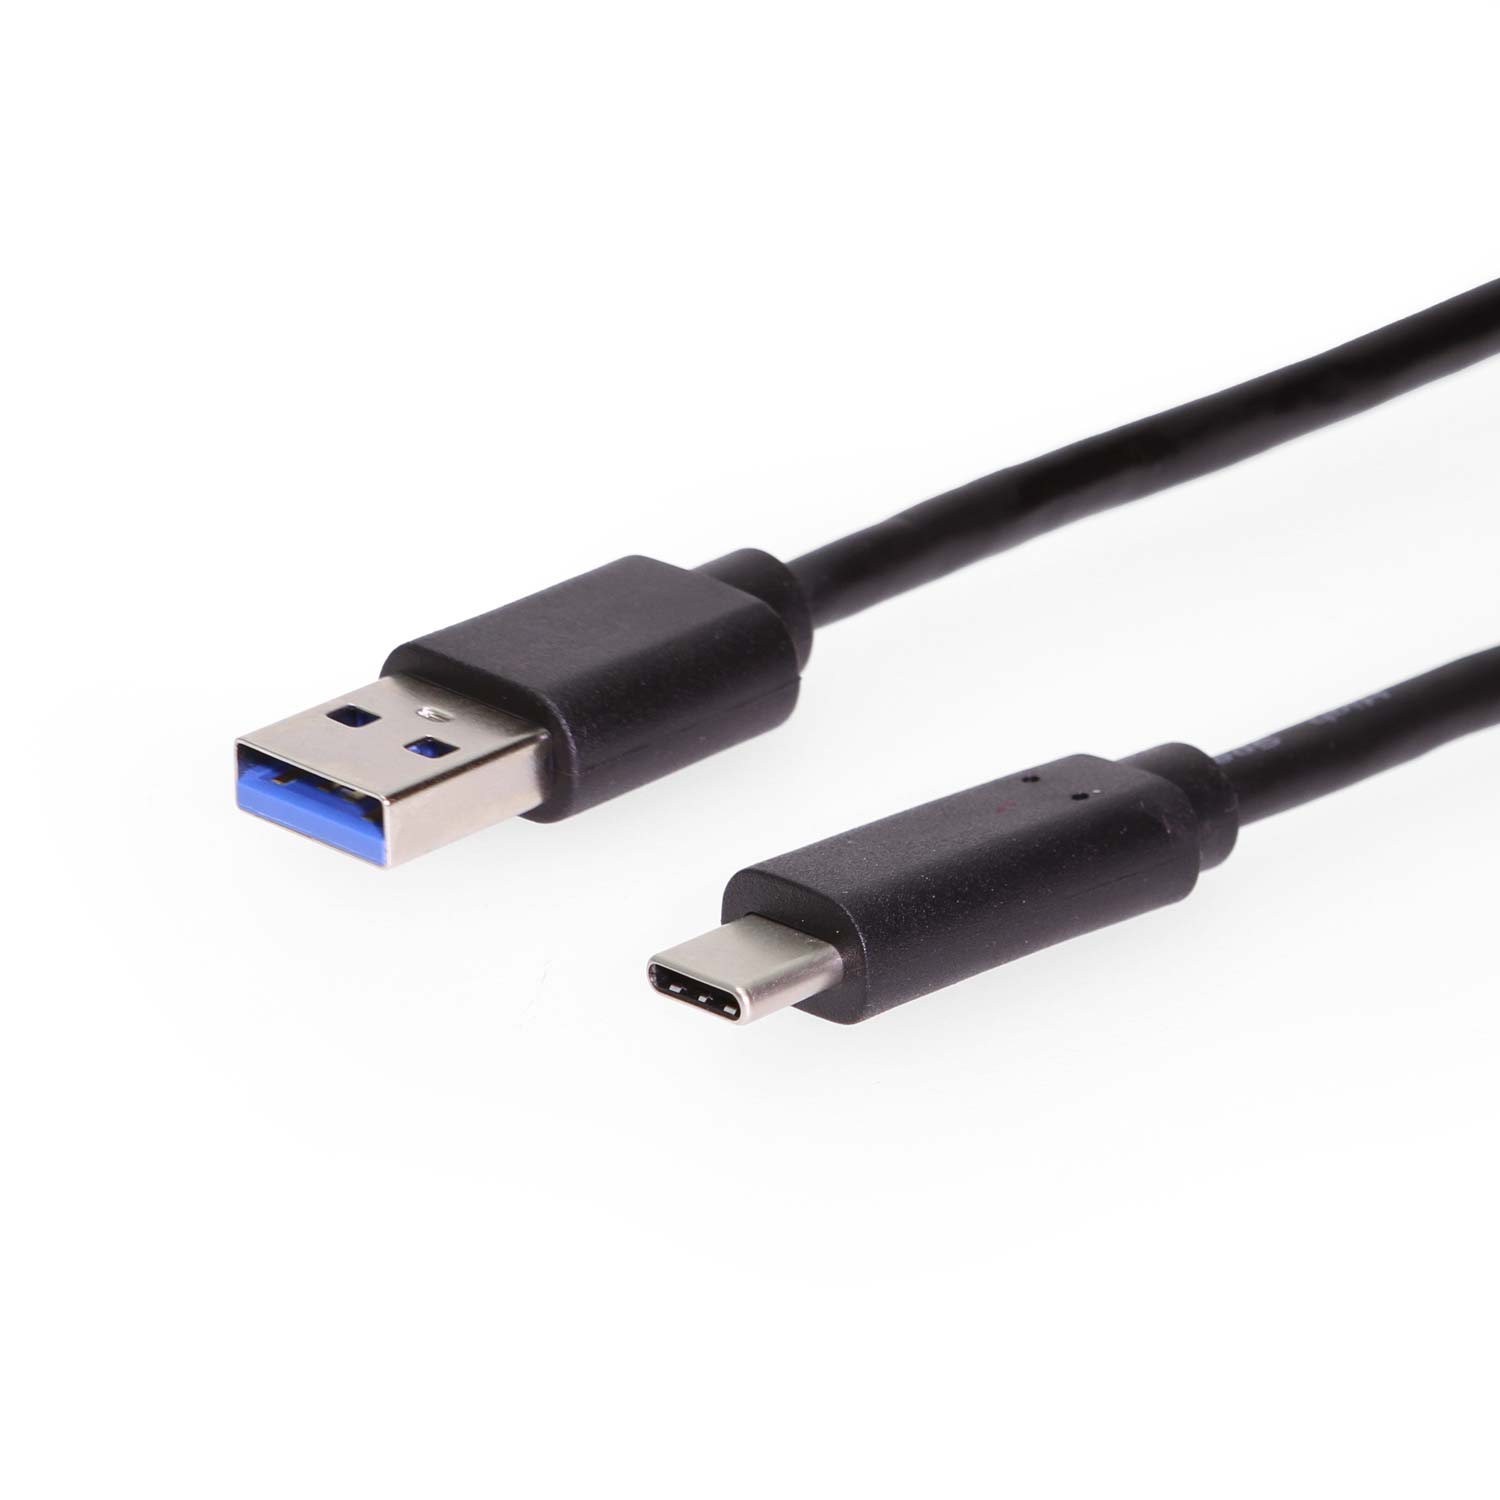 6ft. USB 3.2 Gen 2 Type-C Male to Type-A Male Cable